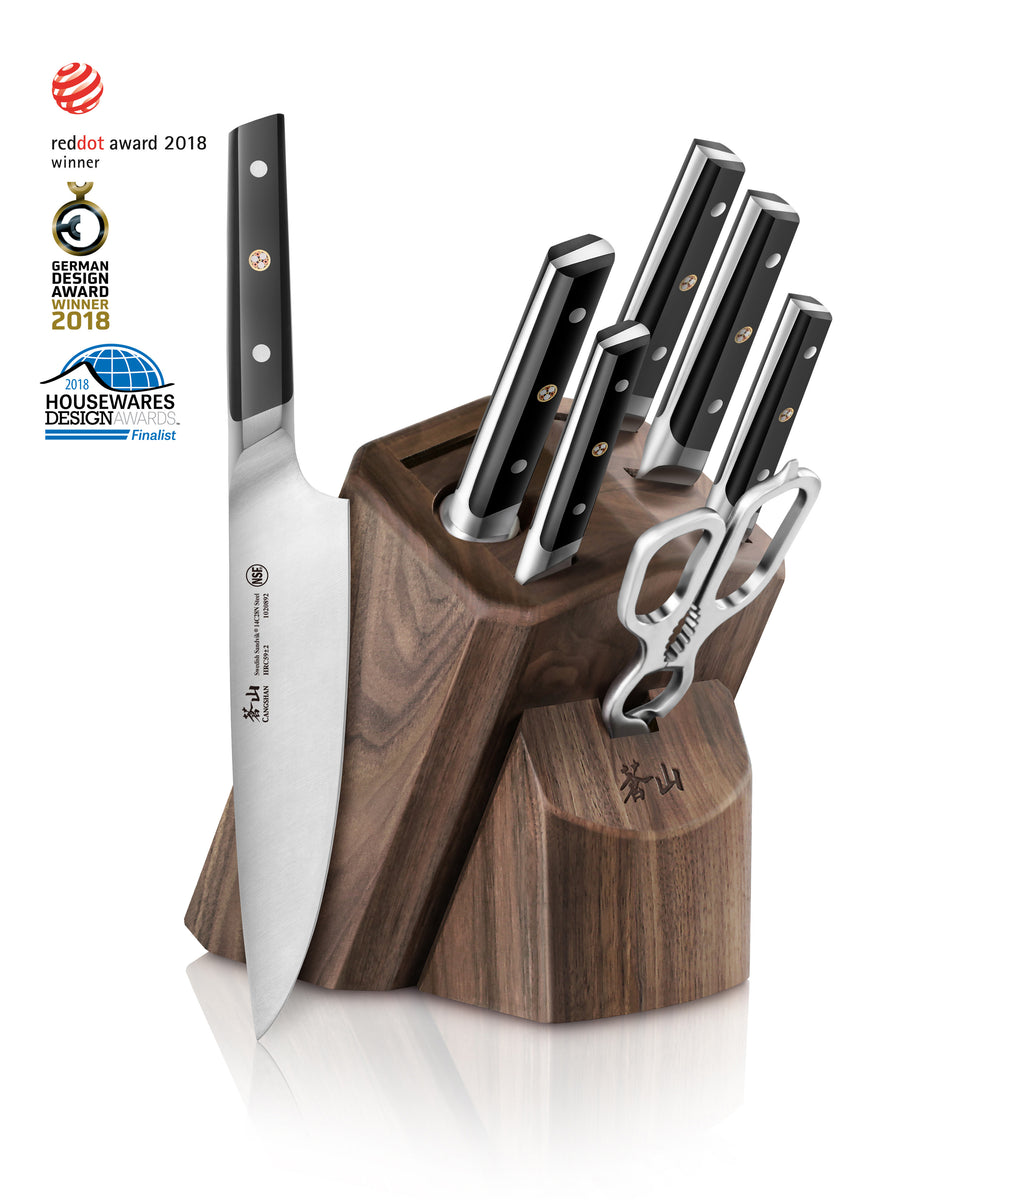 Cangshan Rain II Series 8-Piece Stainless Steel Forged Steak Knife Set in Bamboo Storage Chest